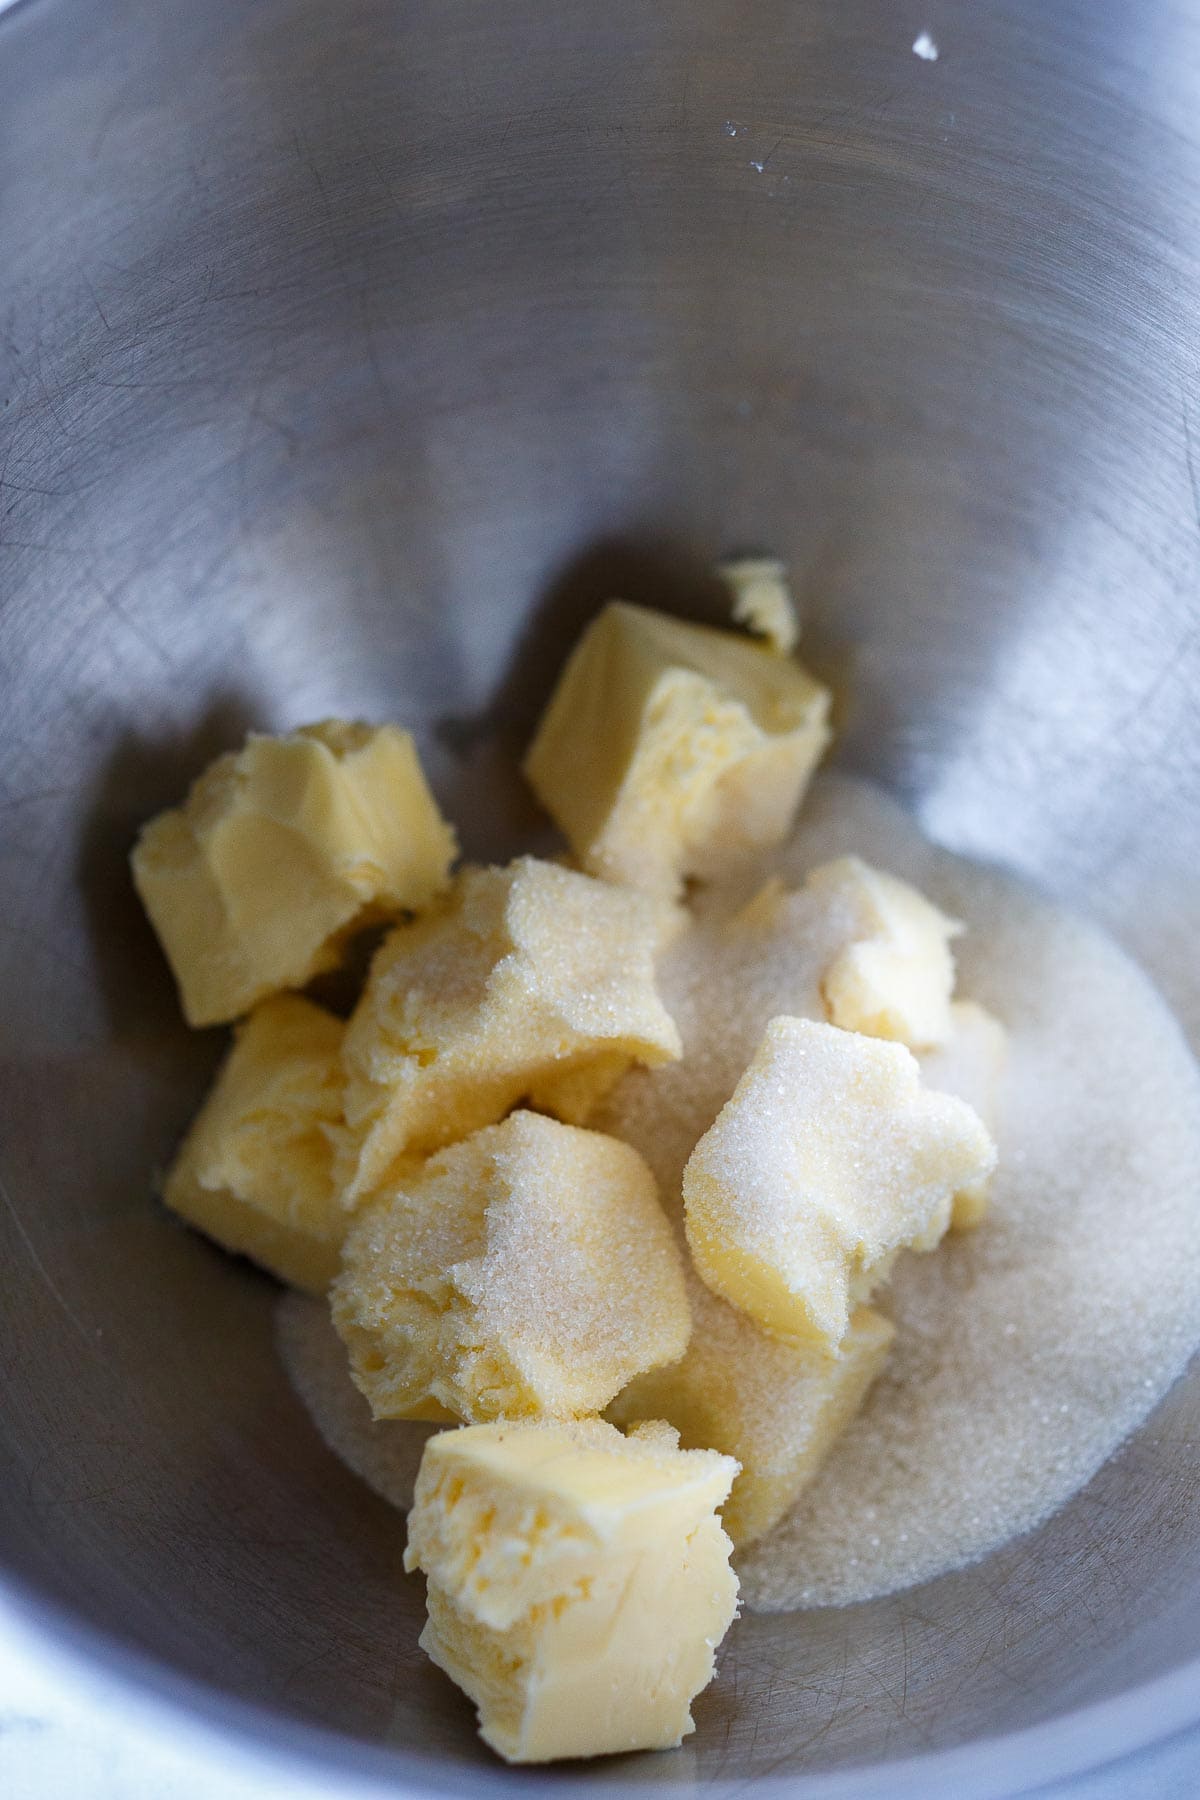 Butter and sugar in kitchen aid mixer bowl.